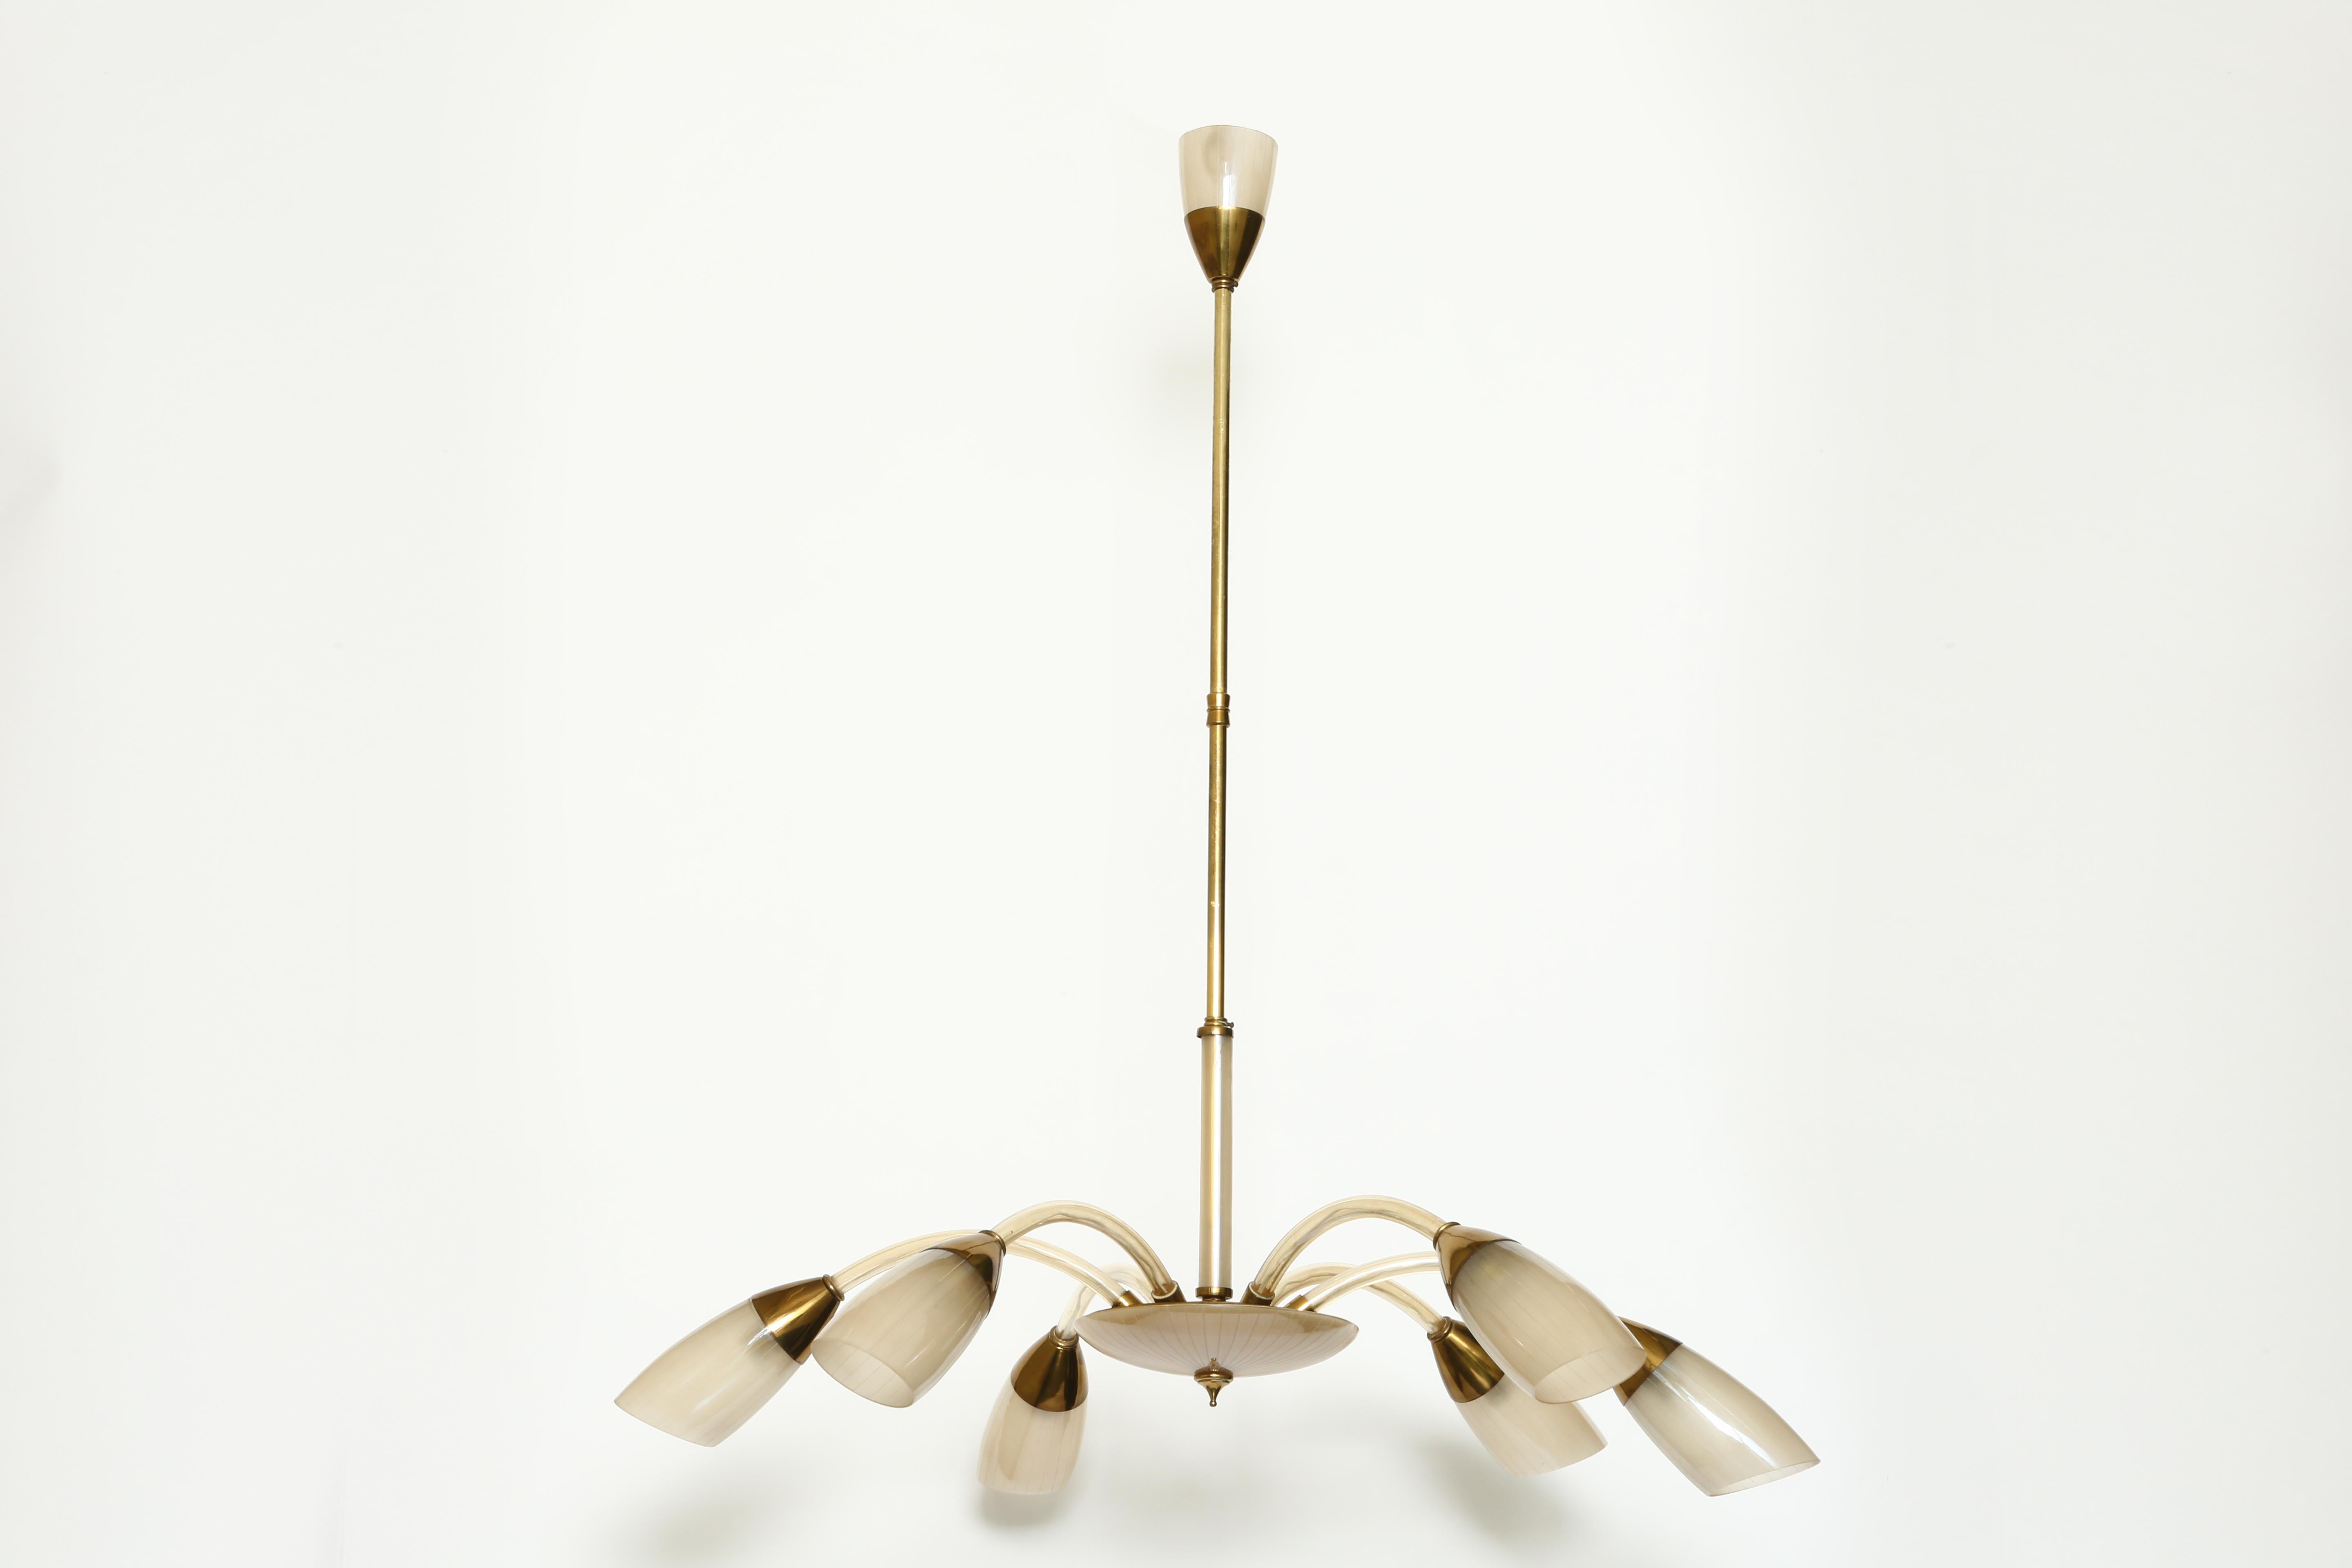 Stilnovo style Italian chandelier with six arms.
Made with brass and beautiful peach color glass.

   